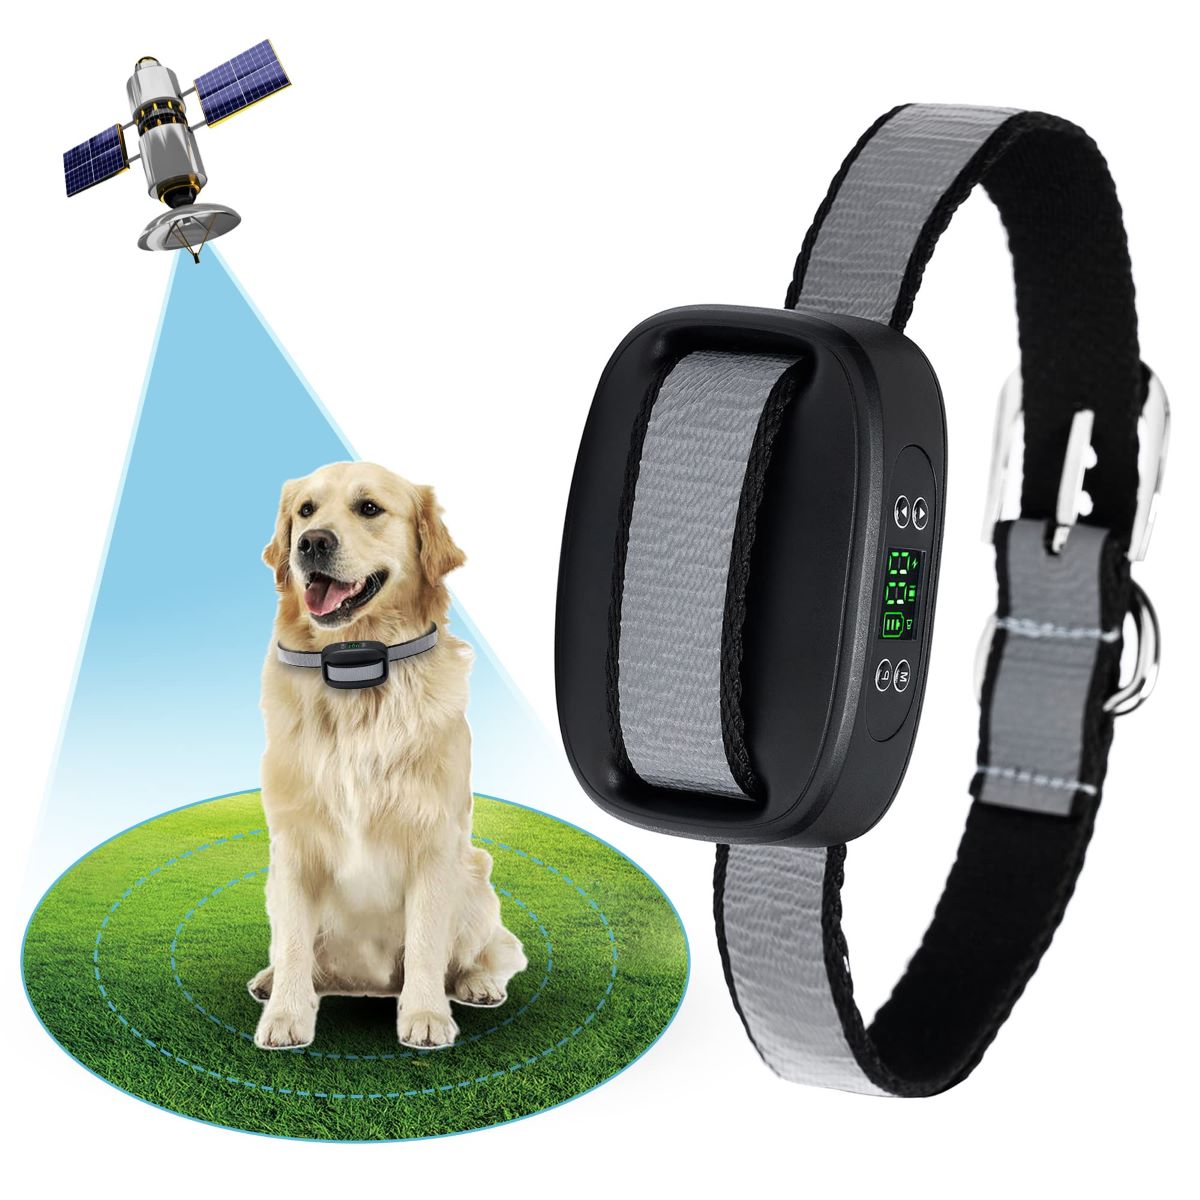 How Does Wireless Dog Fence Work